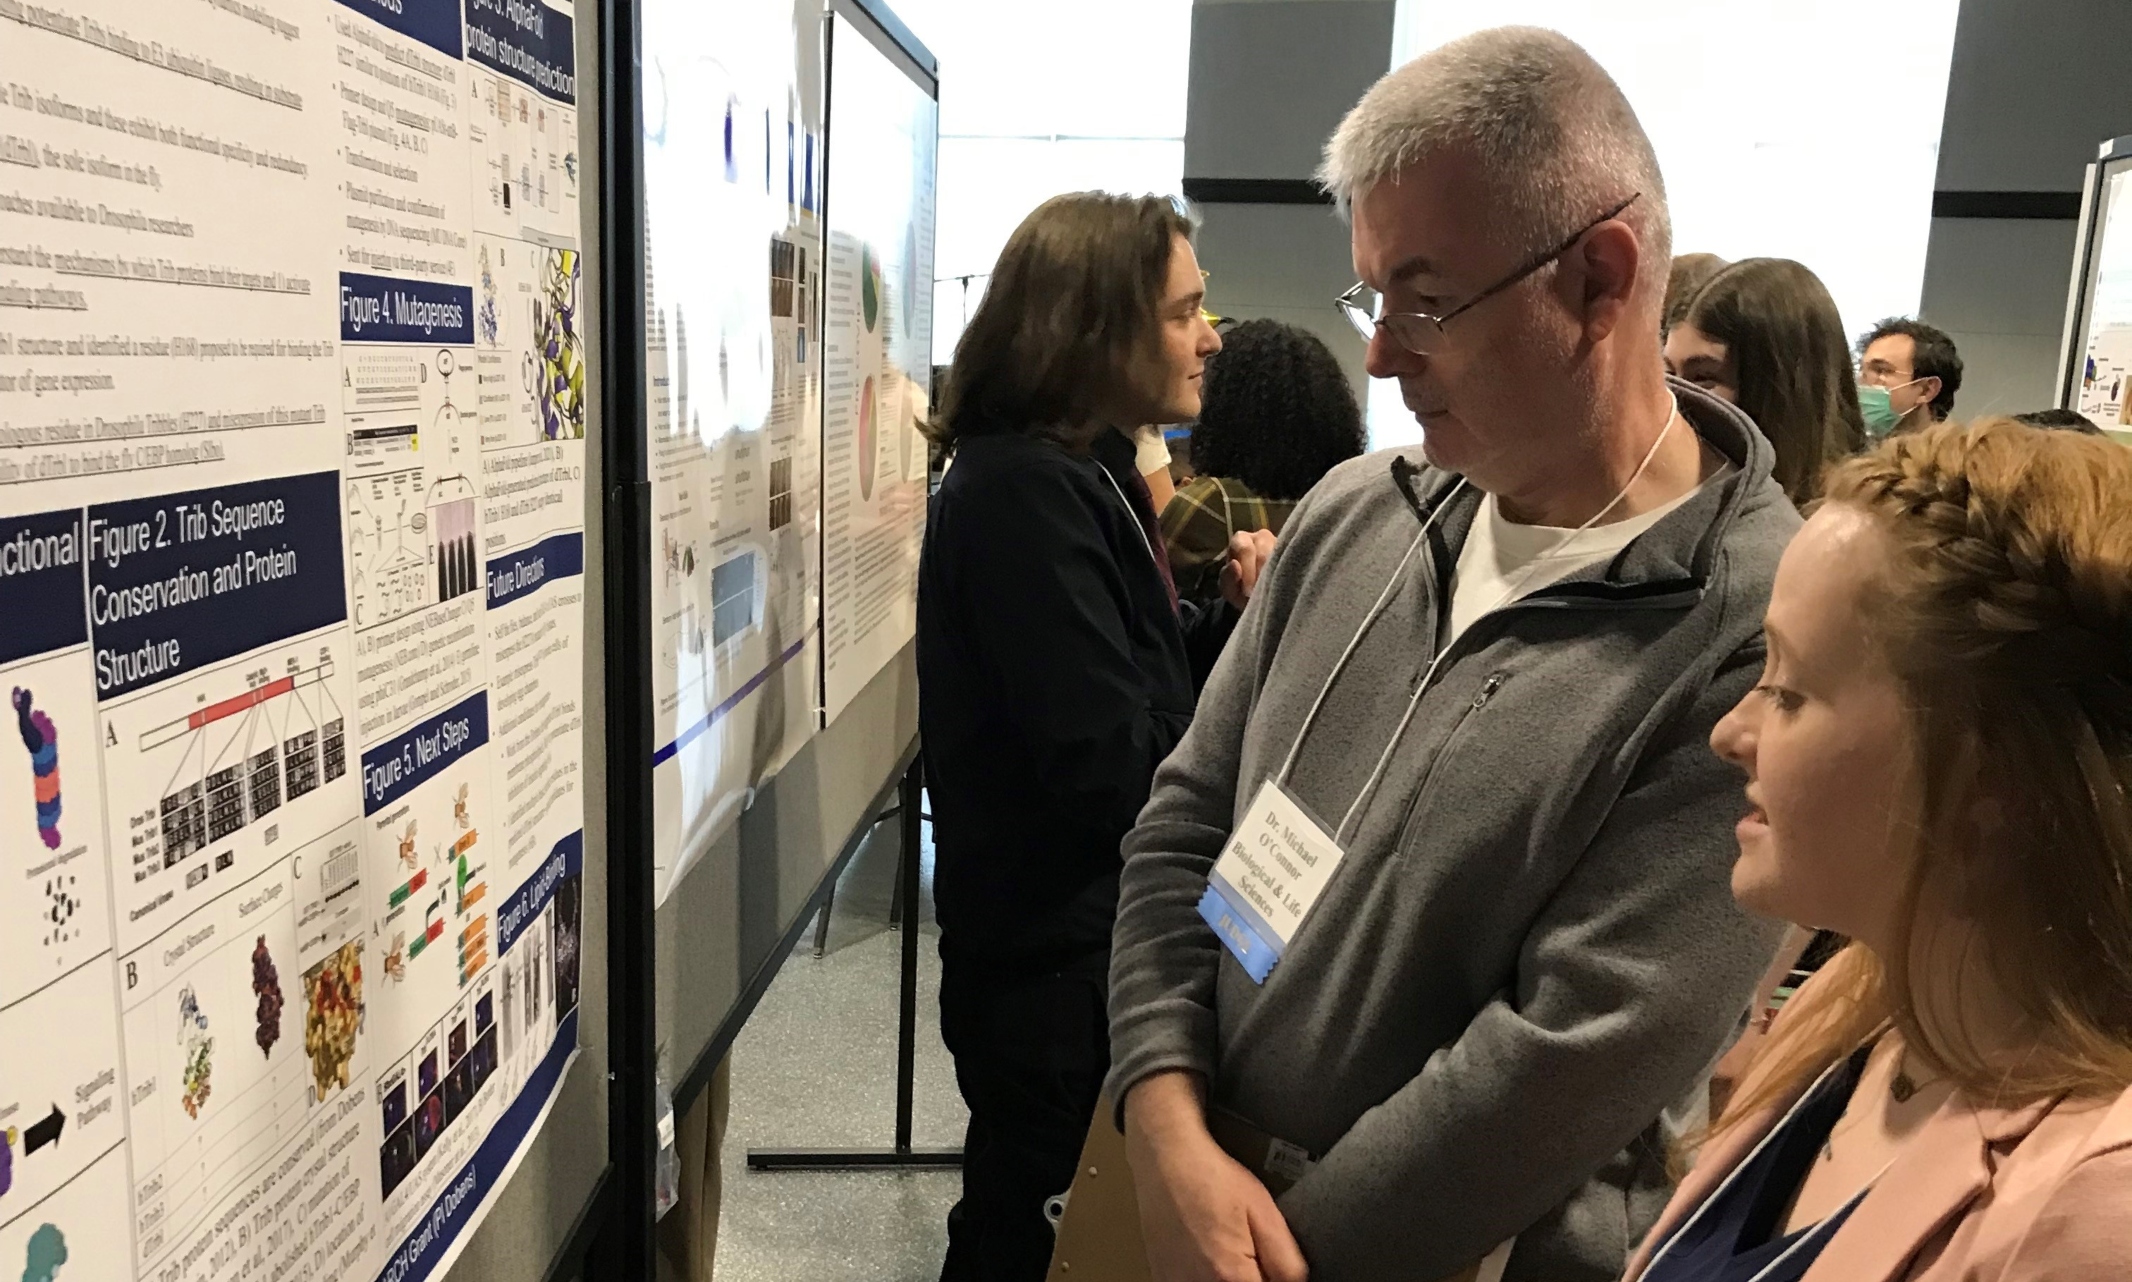 Shea O'Connor explains her research to an attendee